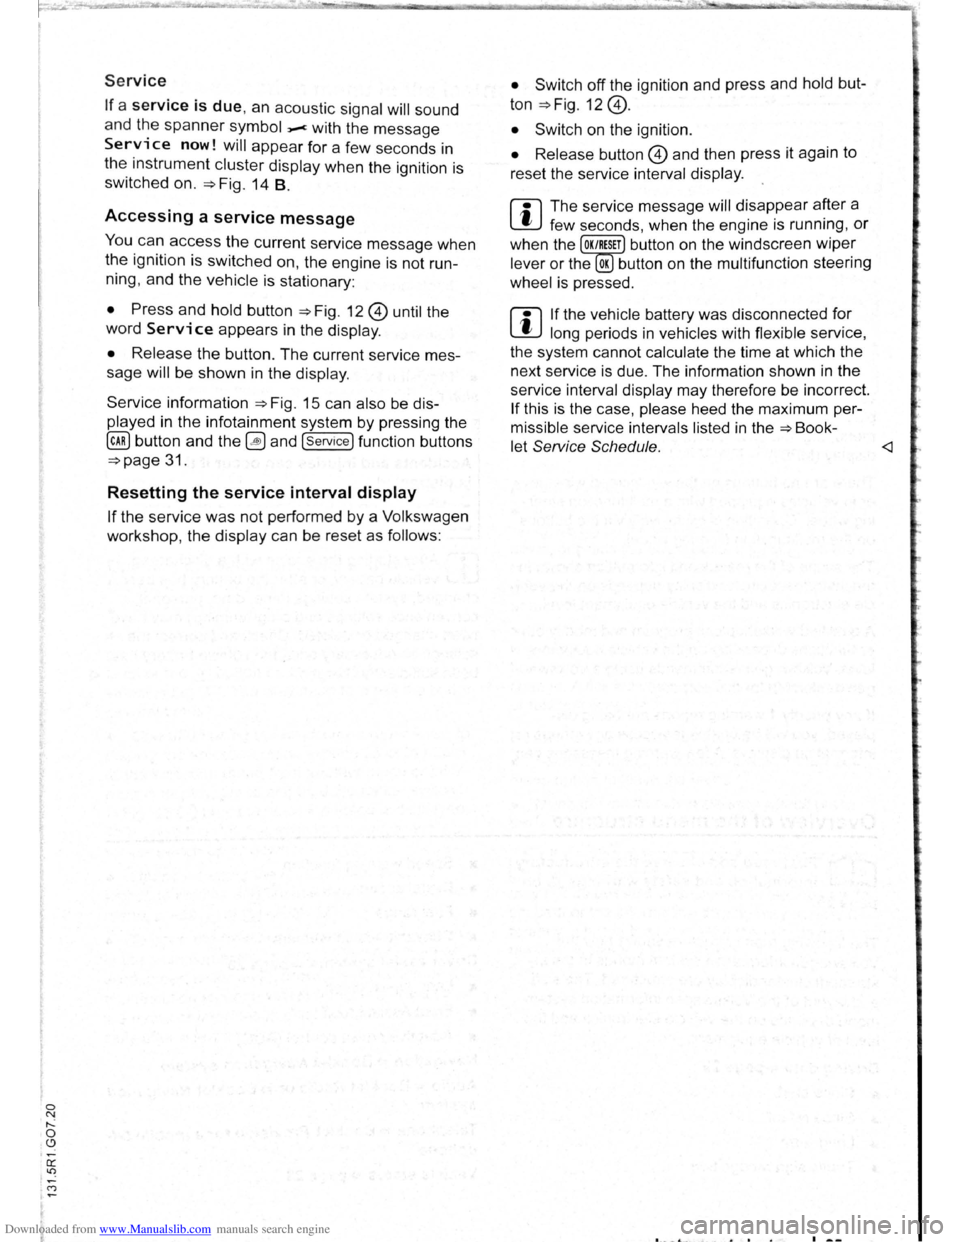 VOLKSWAGEN SCIROCCO 2009  Owners Manual Downloaded from www.Manualslib.com manuals search engine 0 N ,....: 0 .C) 
Service 
If a service is due, an acoustic signal will sound 
and the spanner symbol _.c with the message 
Service now! will a